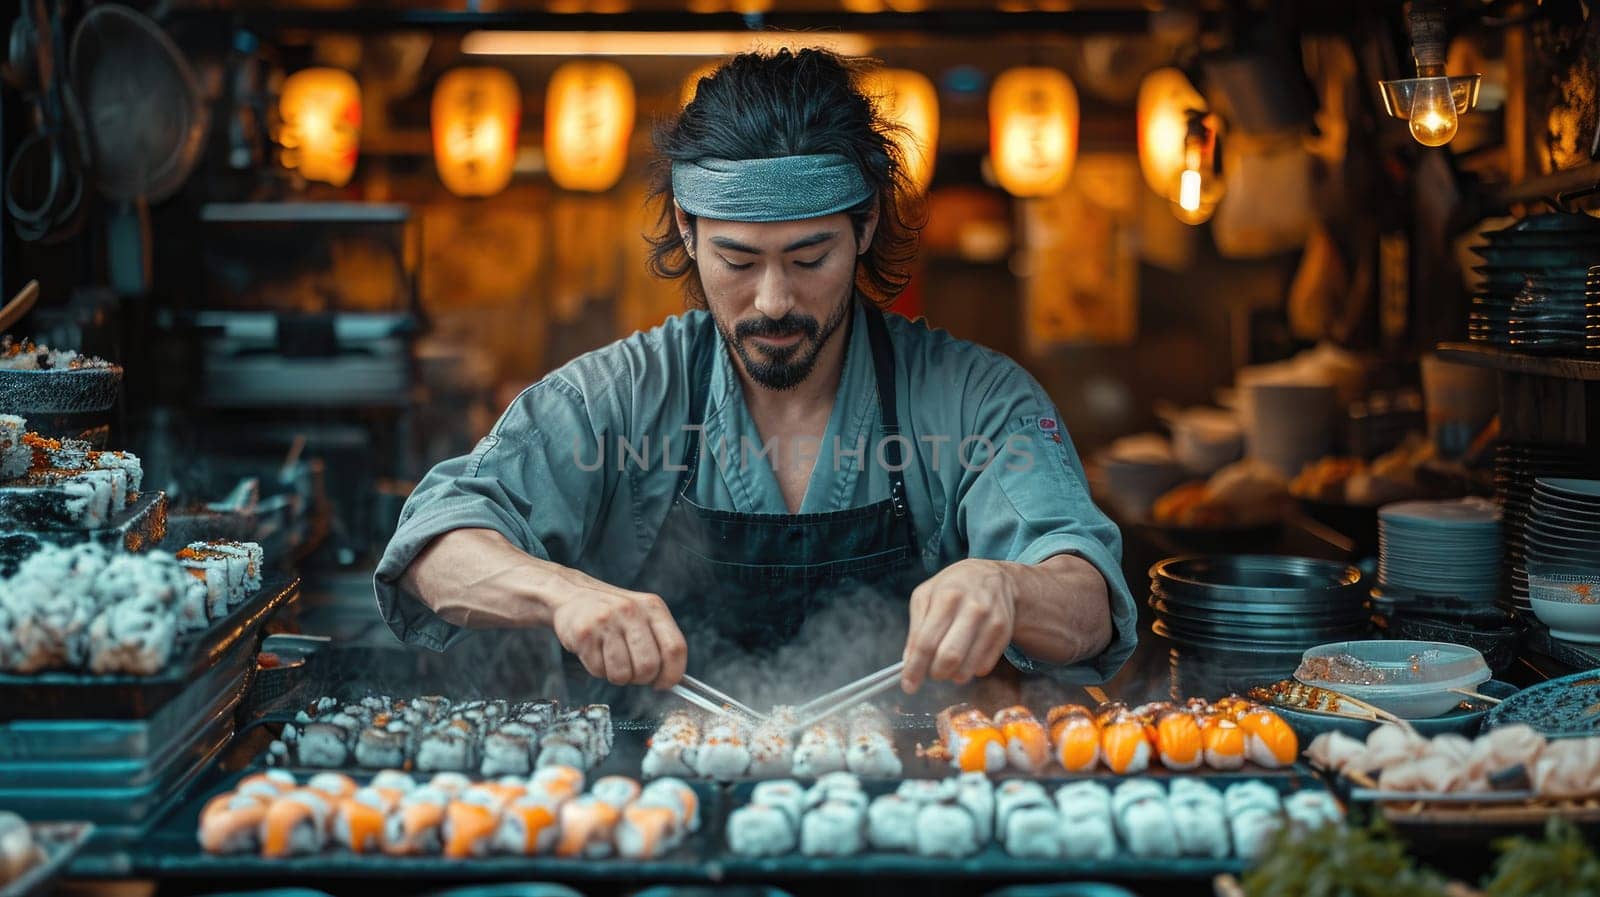 Asian-looking chef prepares fresh rolls and sushi with virtuosity by Yurich32